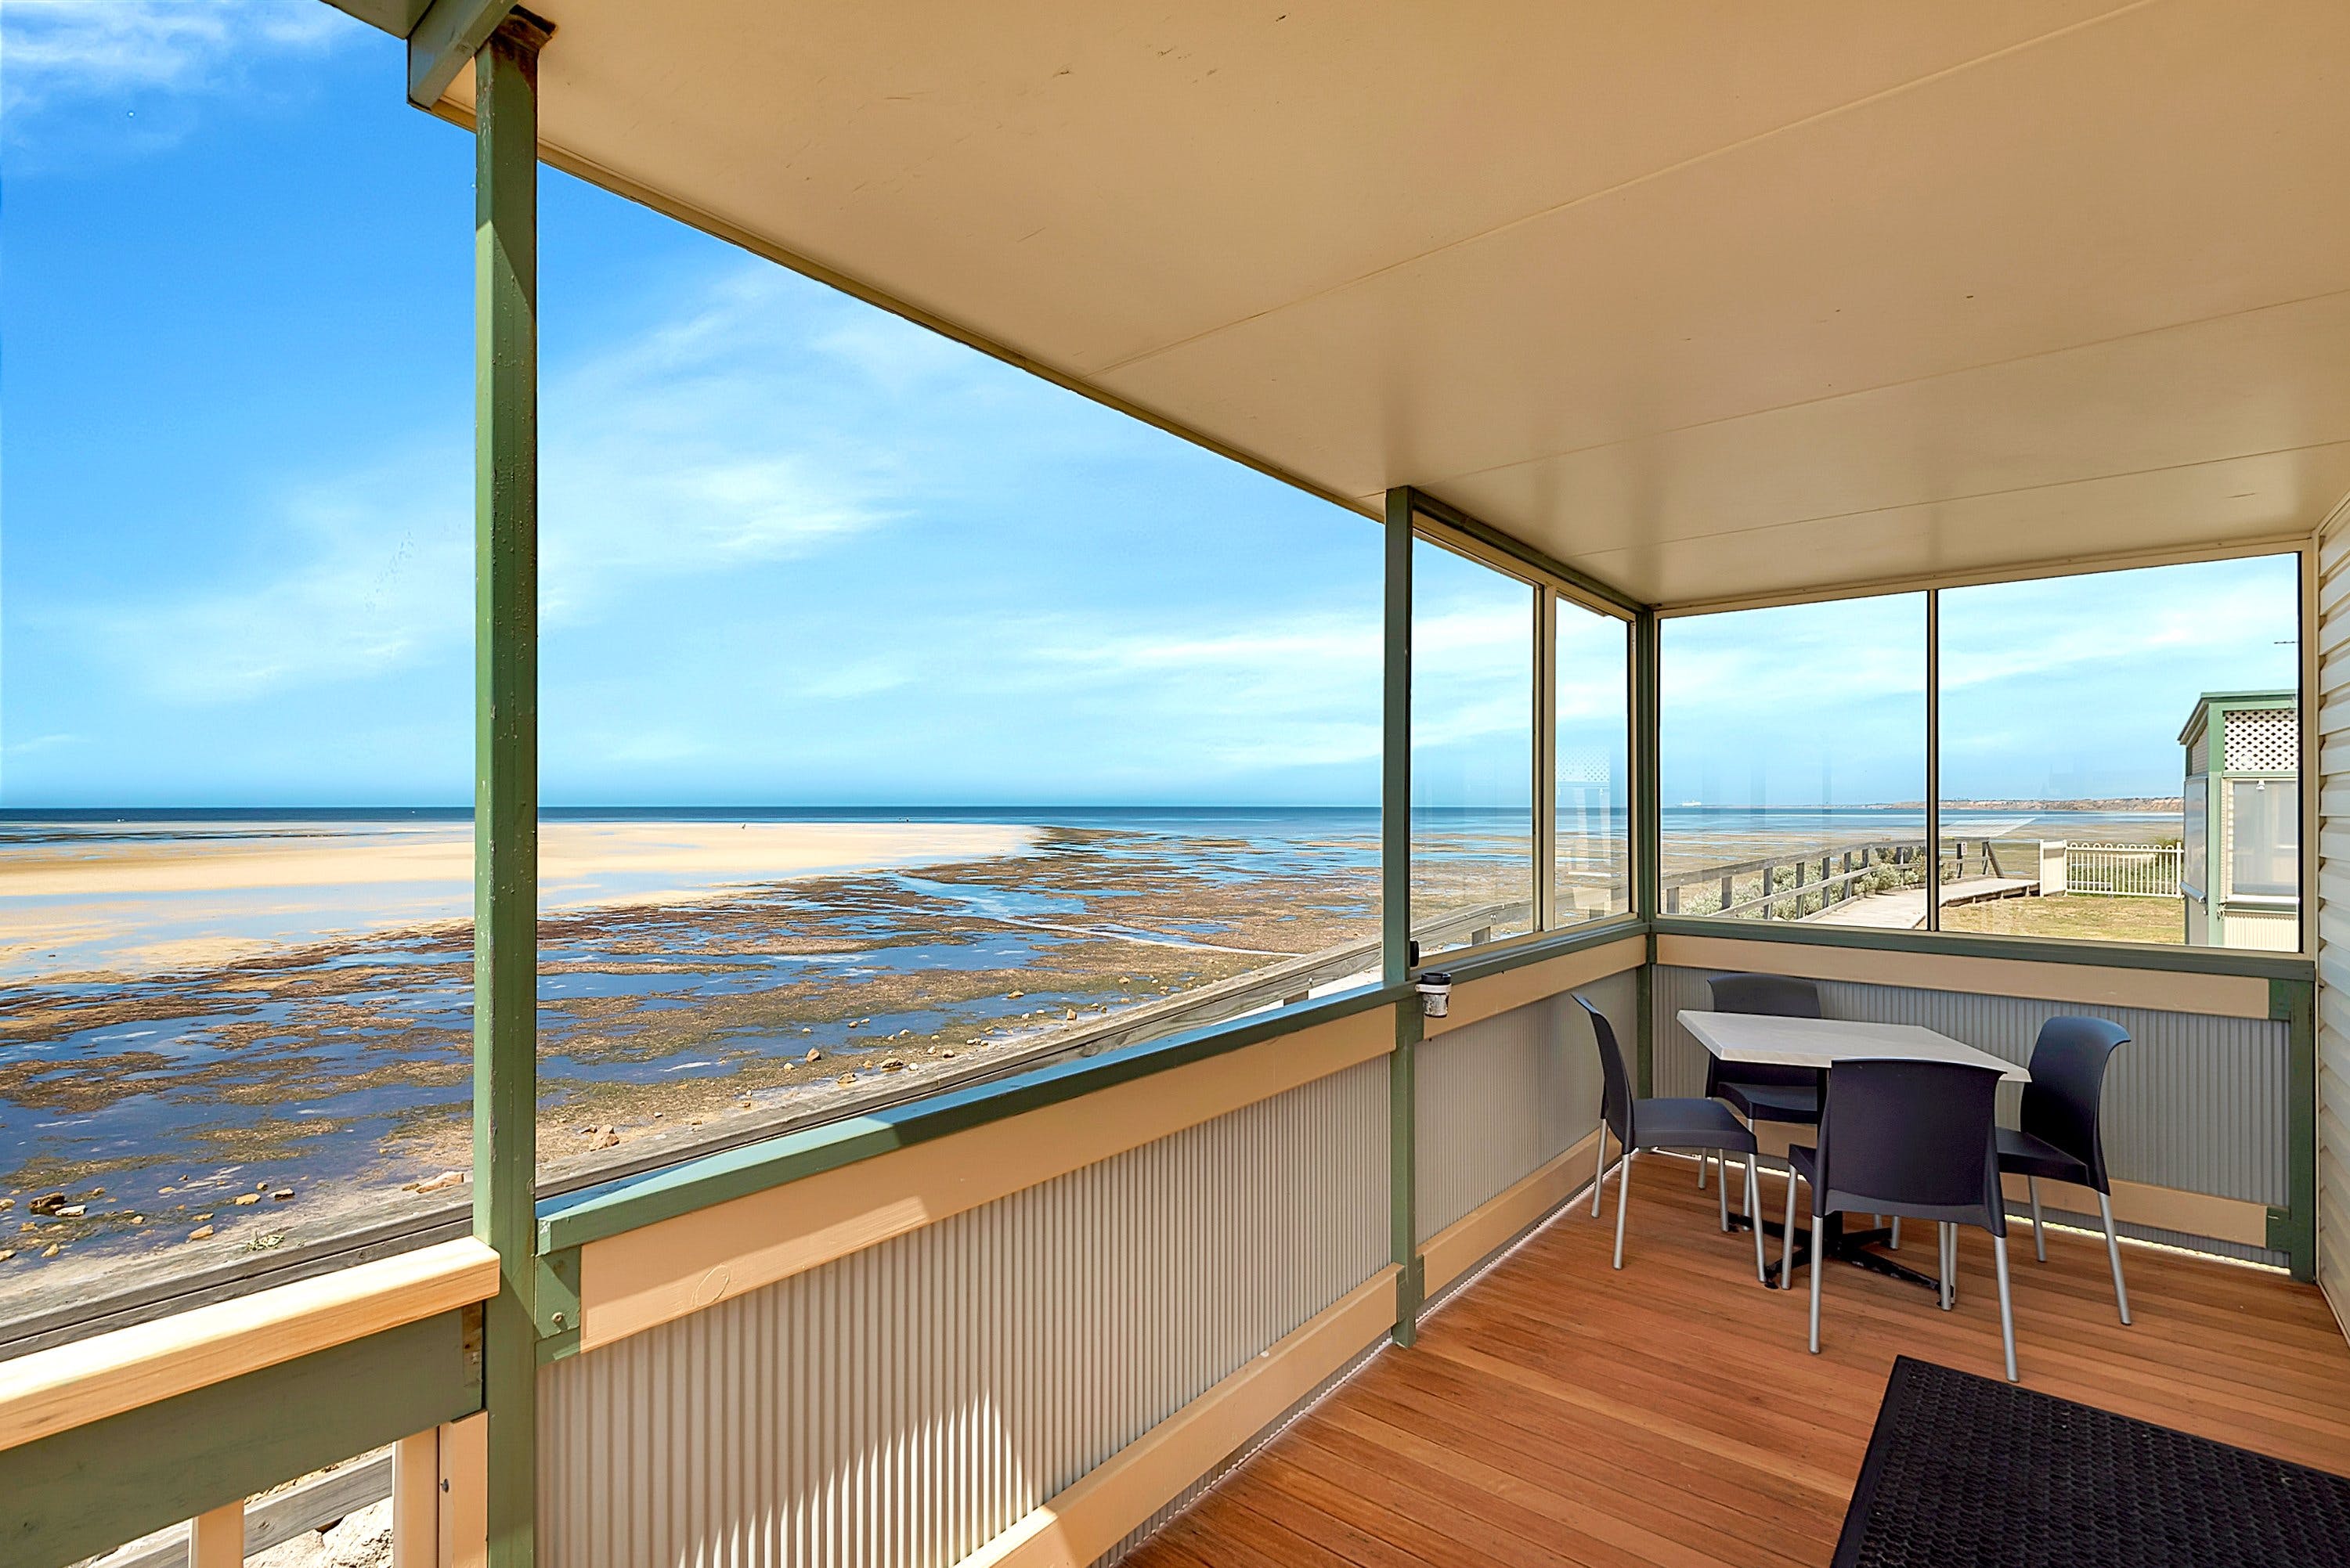 Stansbury Foreshore Caravan Park - Accommodation Redcliffe